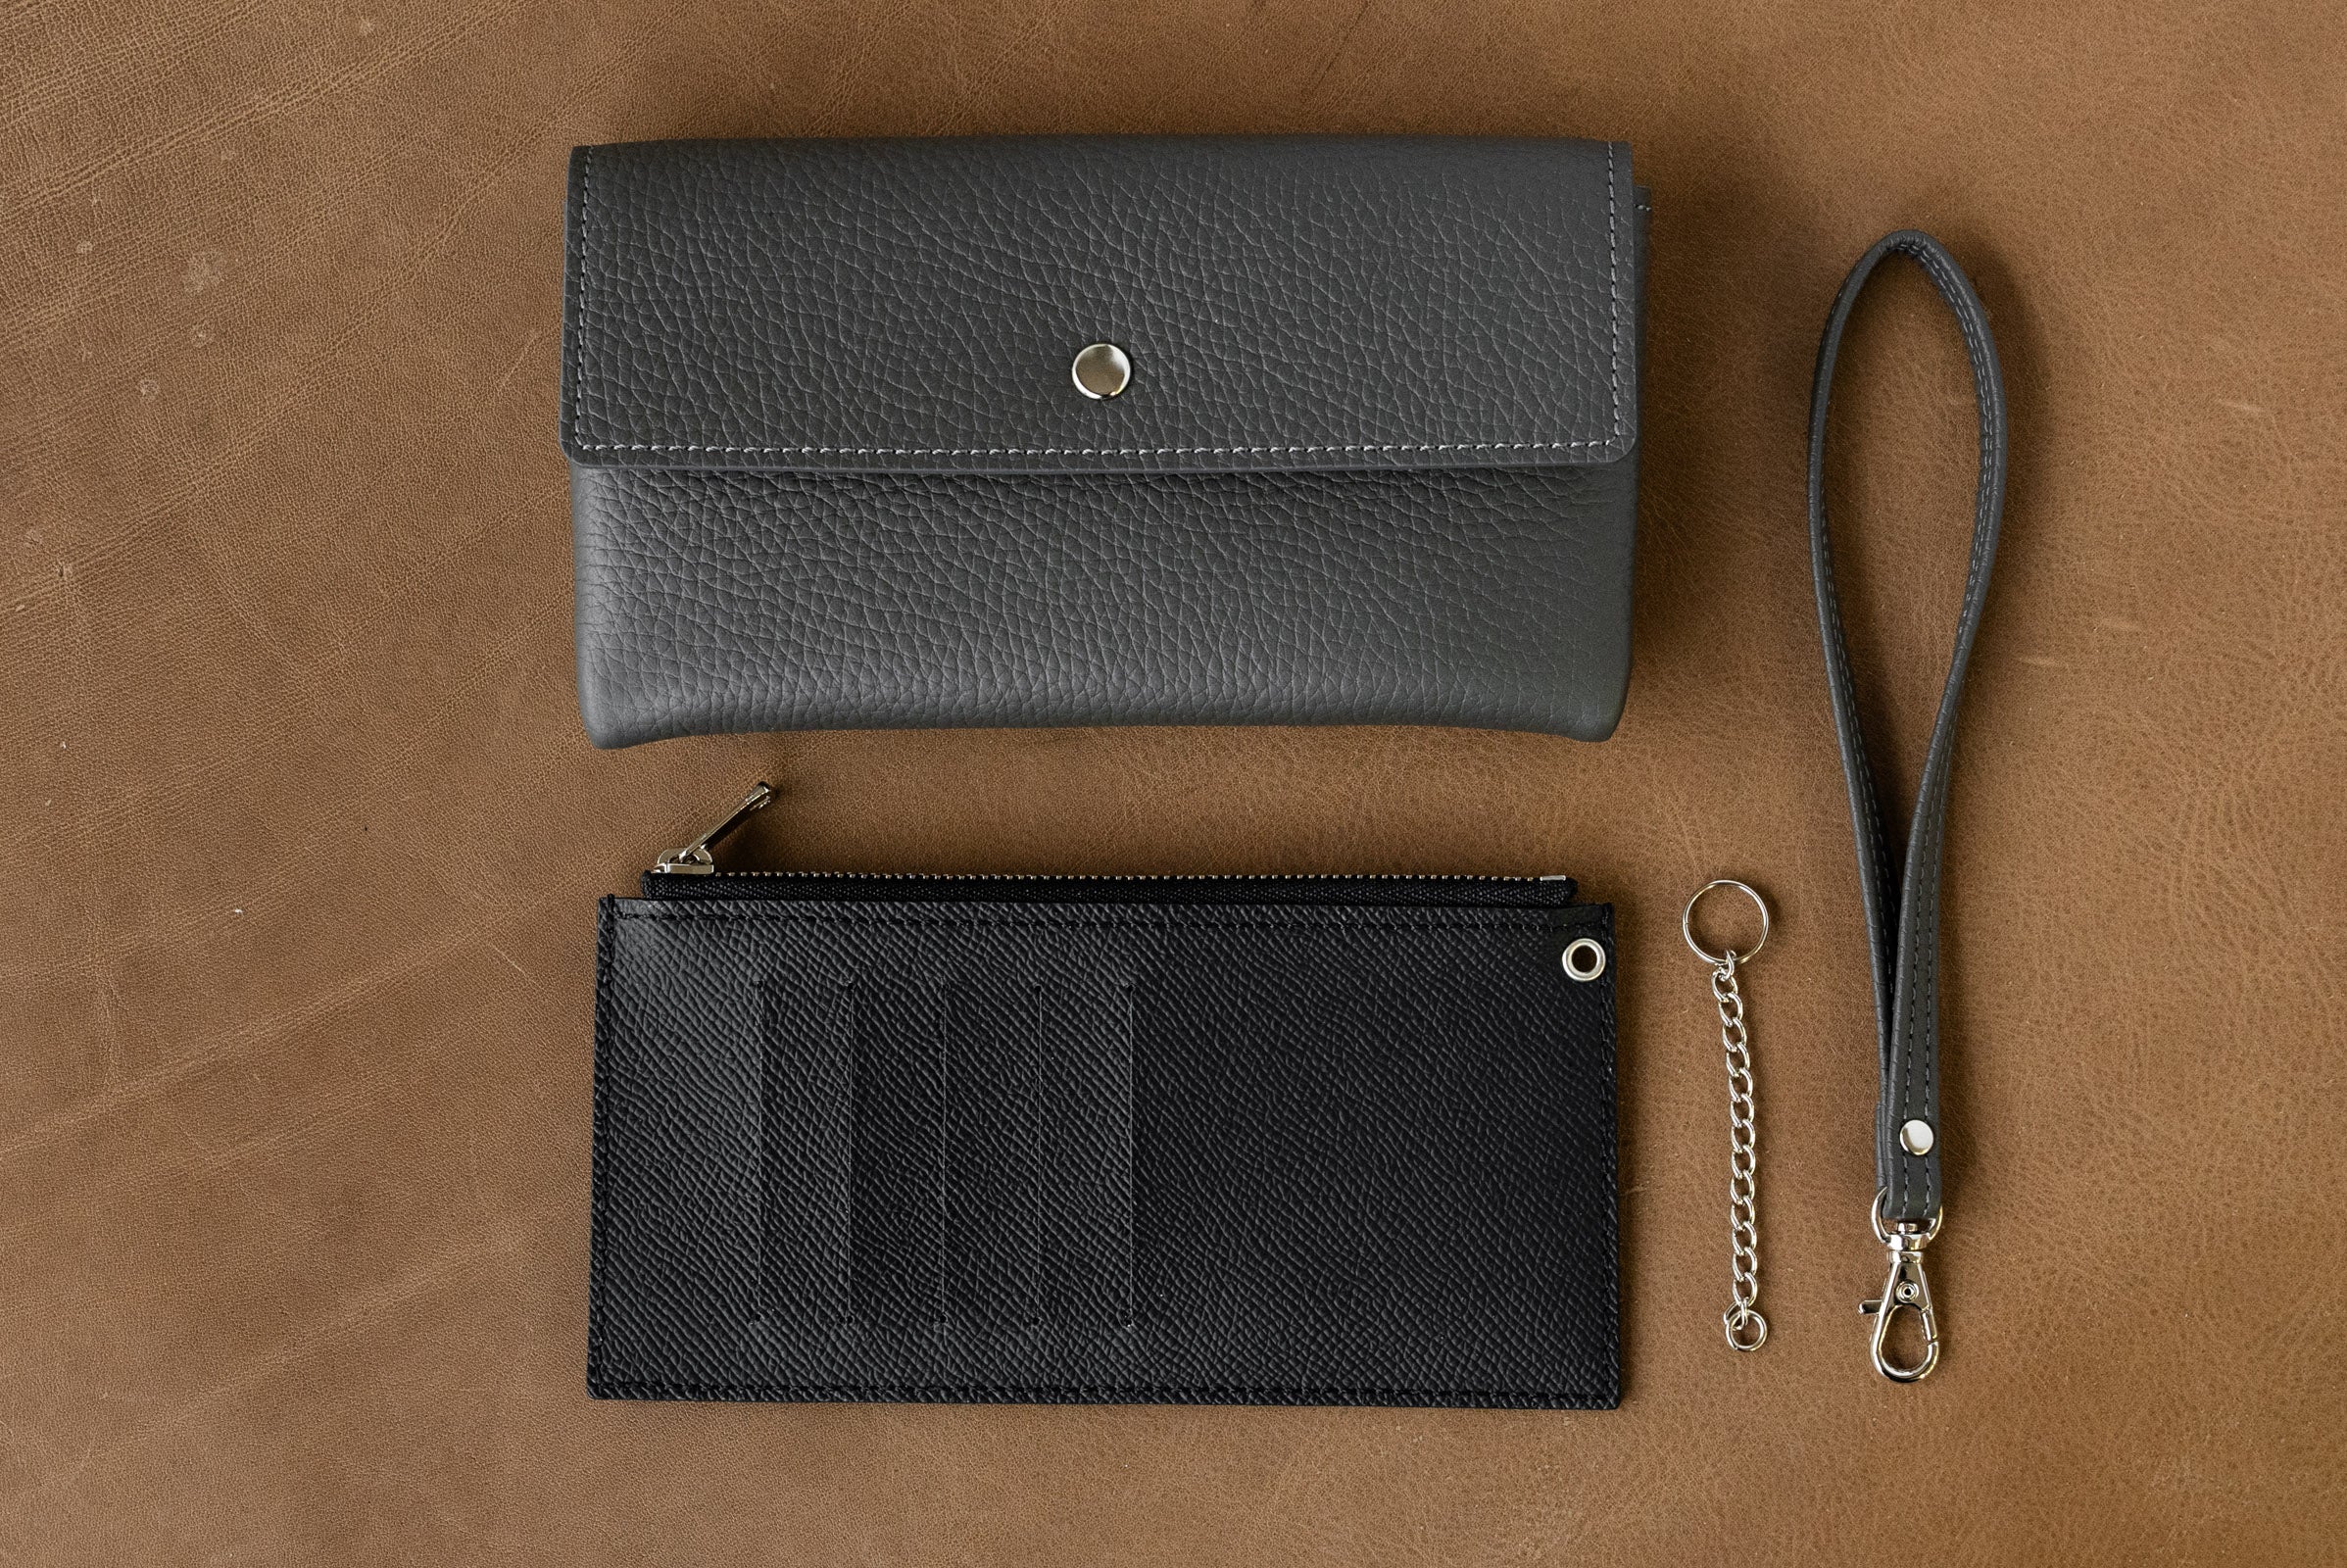 All-in-one wallet《Franc》